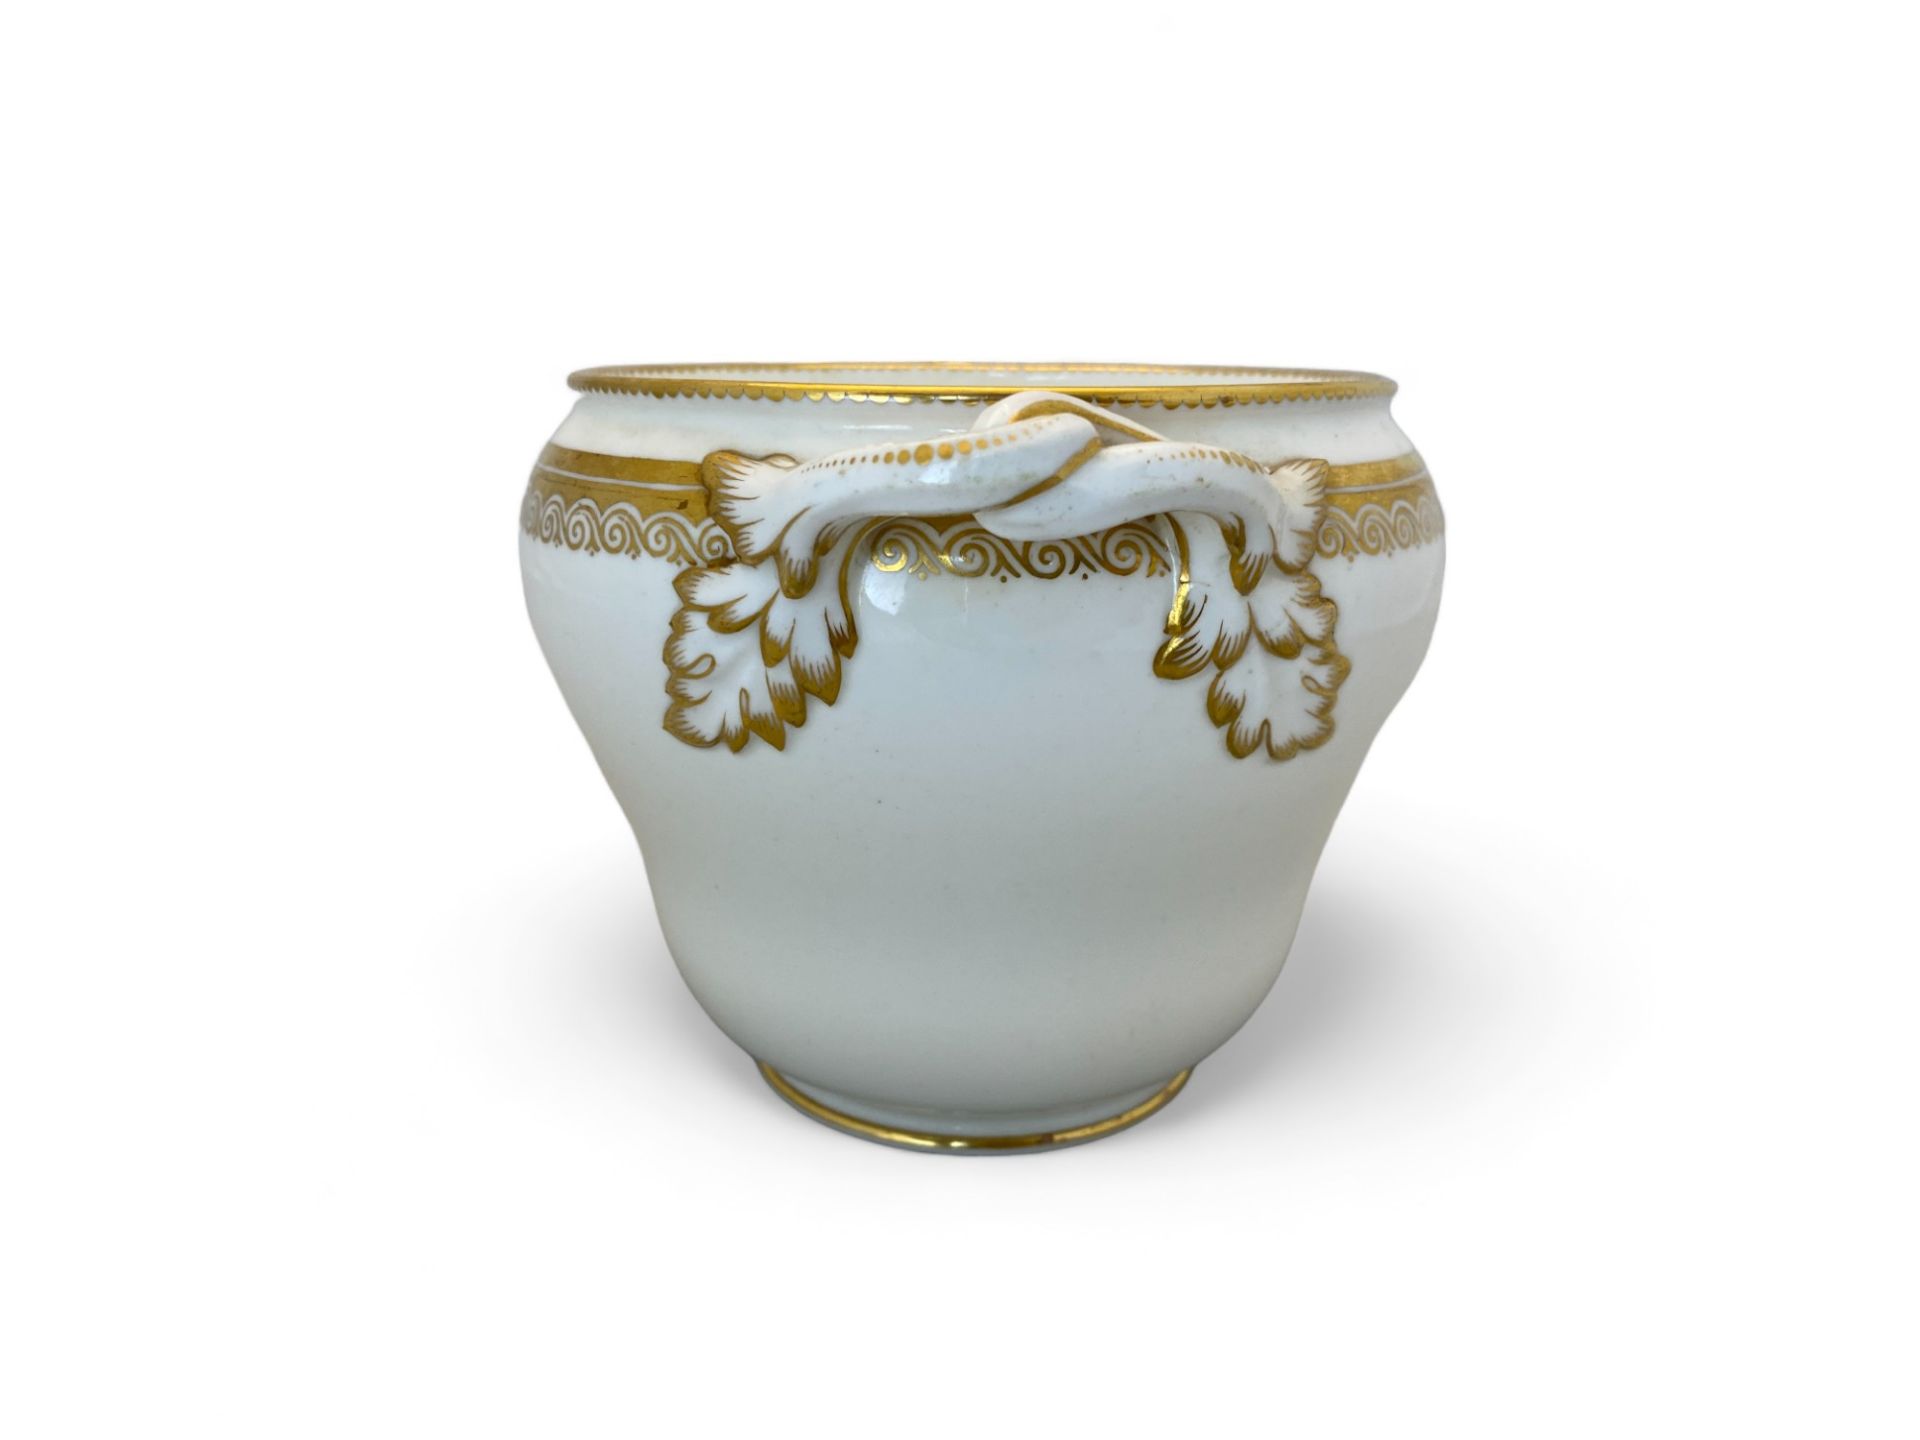 Of Royal Interest: A Mortlock China of Regent St white porcelain and gilt sugar bowl made for Queen - Image 4 of 7